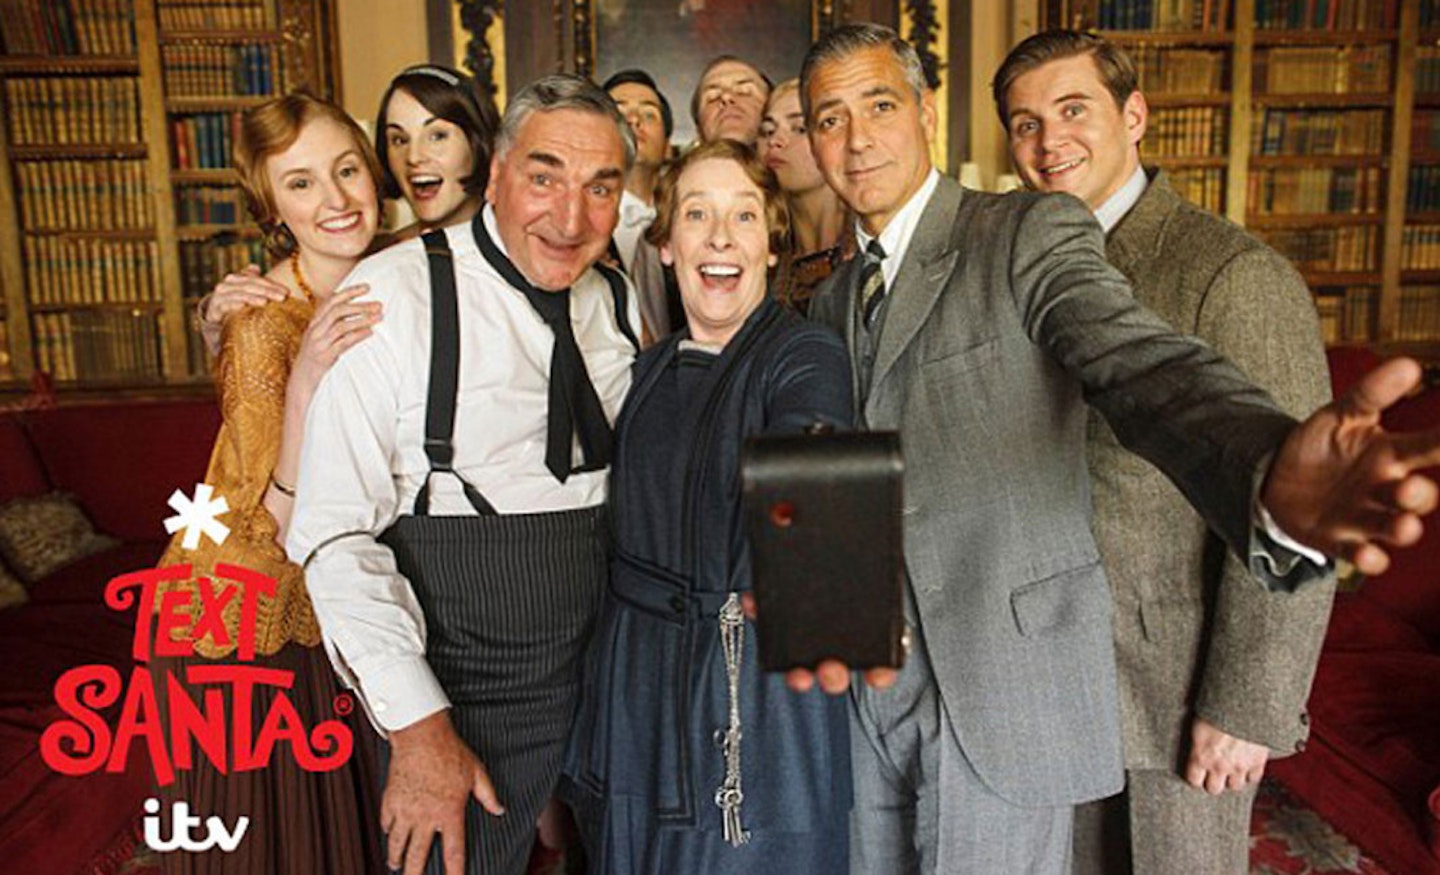 George Clooney joins the Downton cast [ITV]